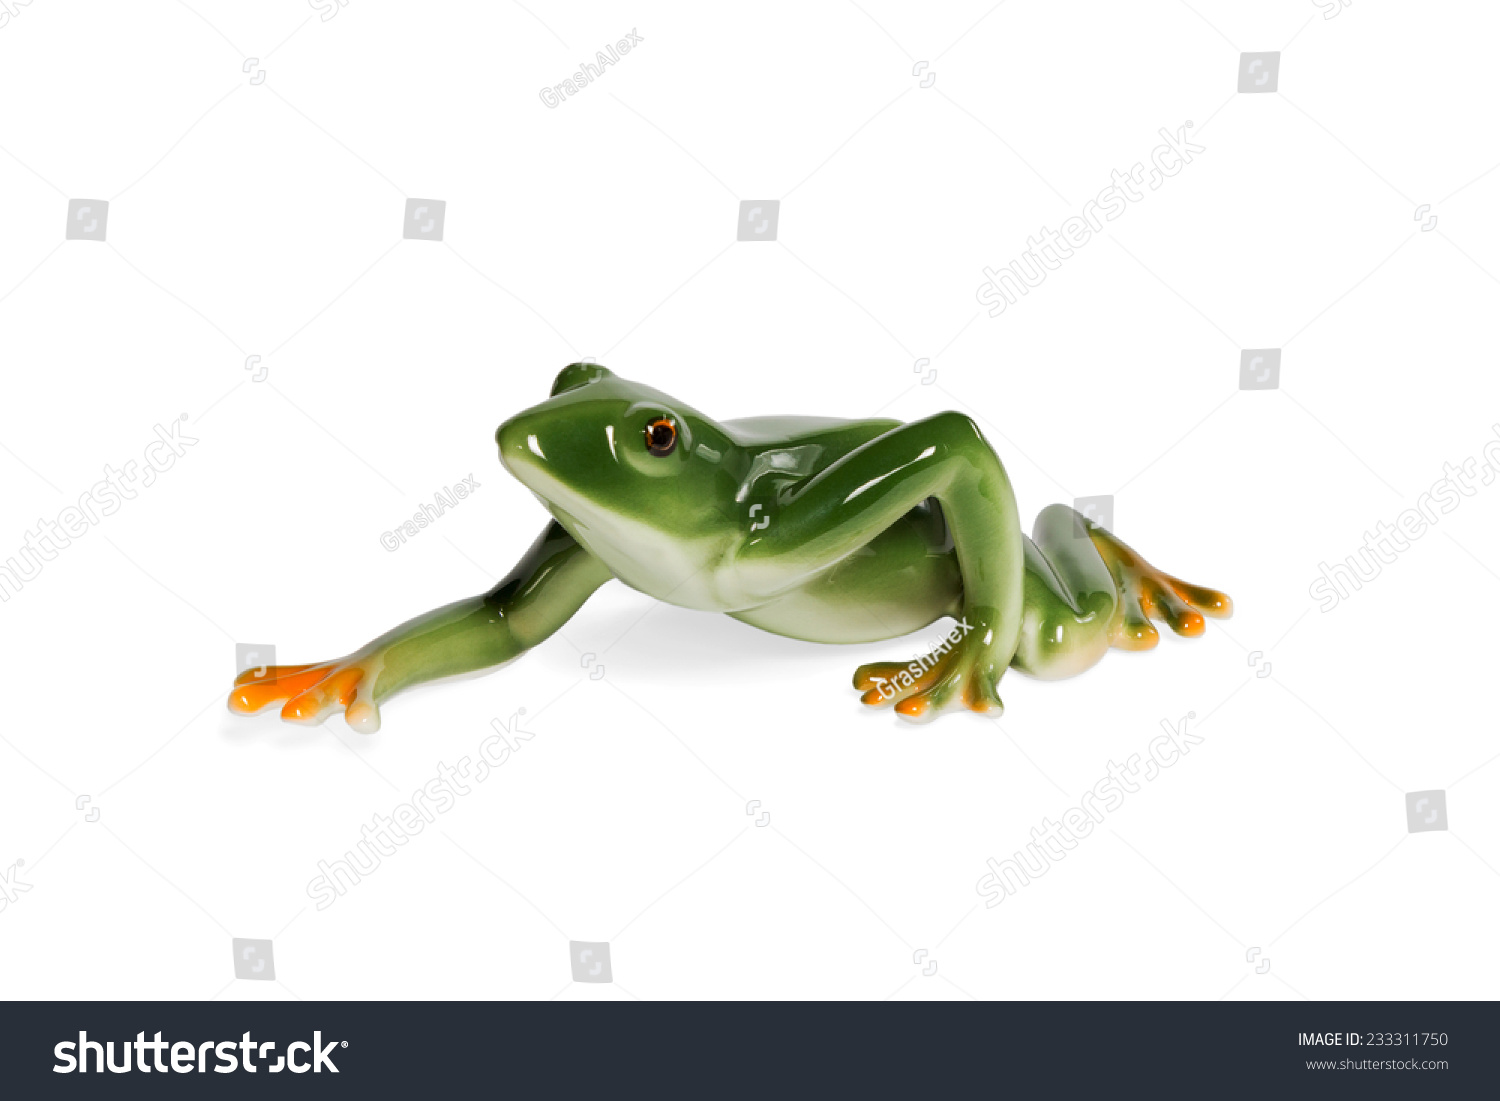 Glass figurine green frog crawling side view isolated on white background #233311750